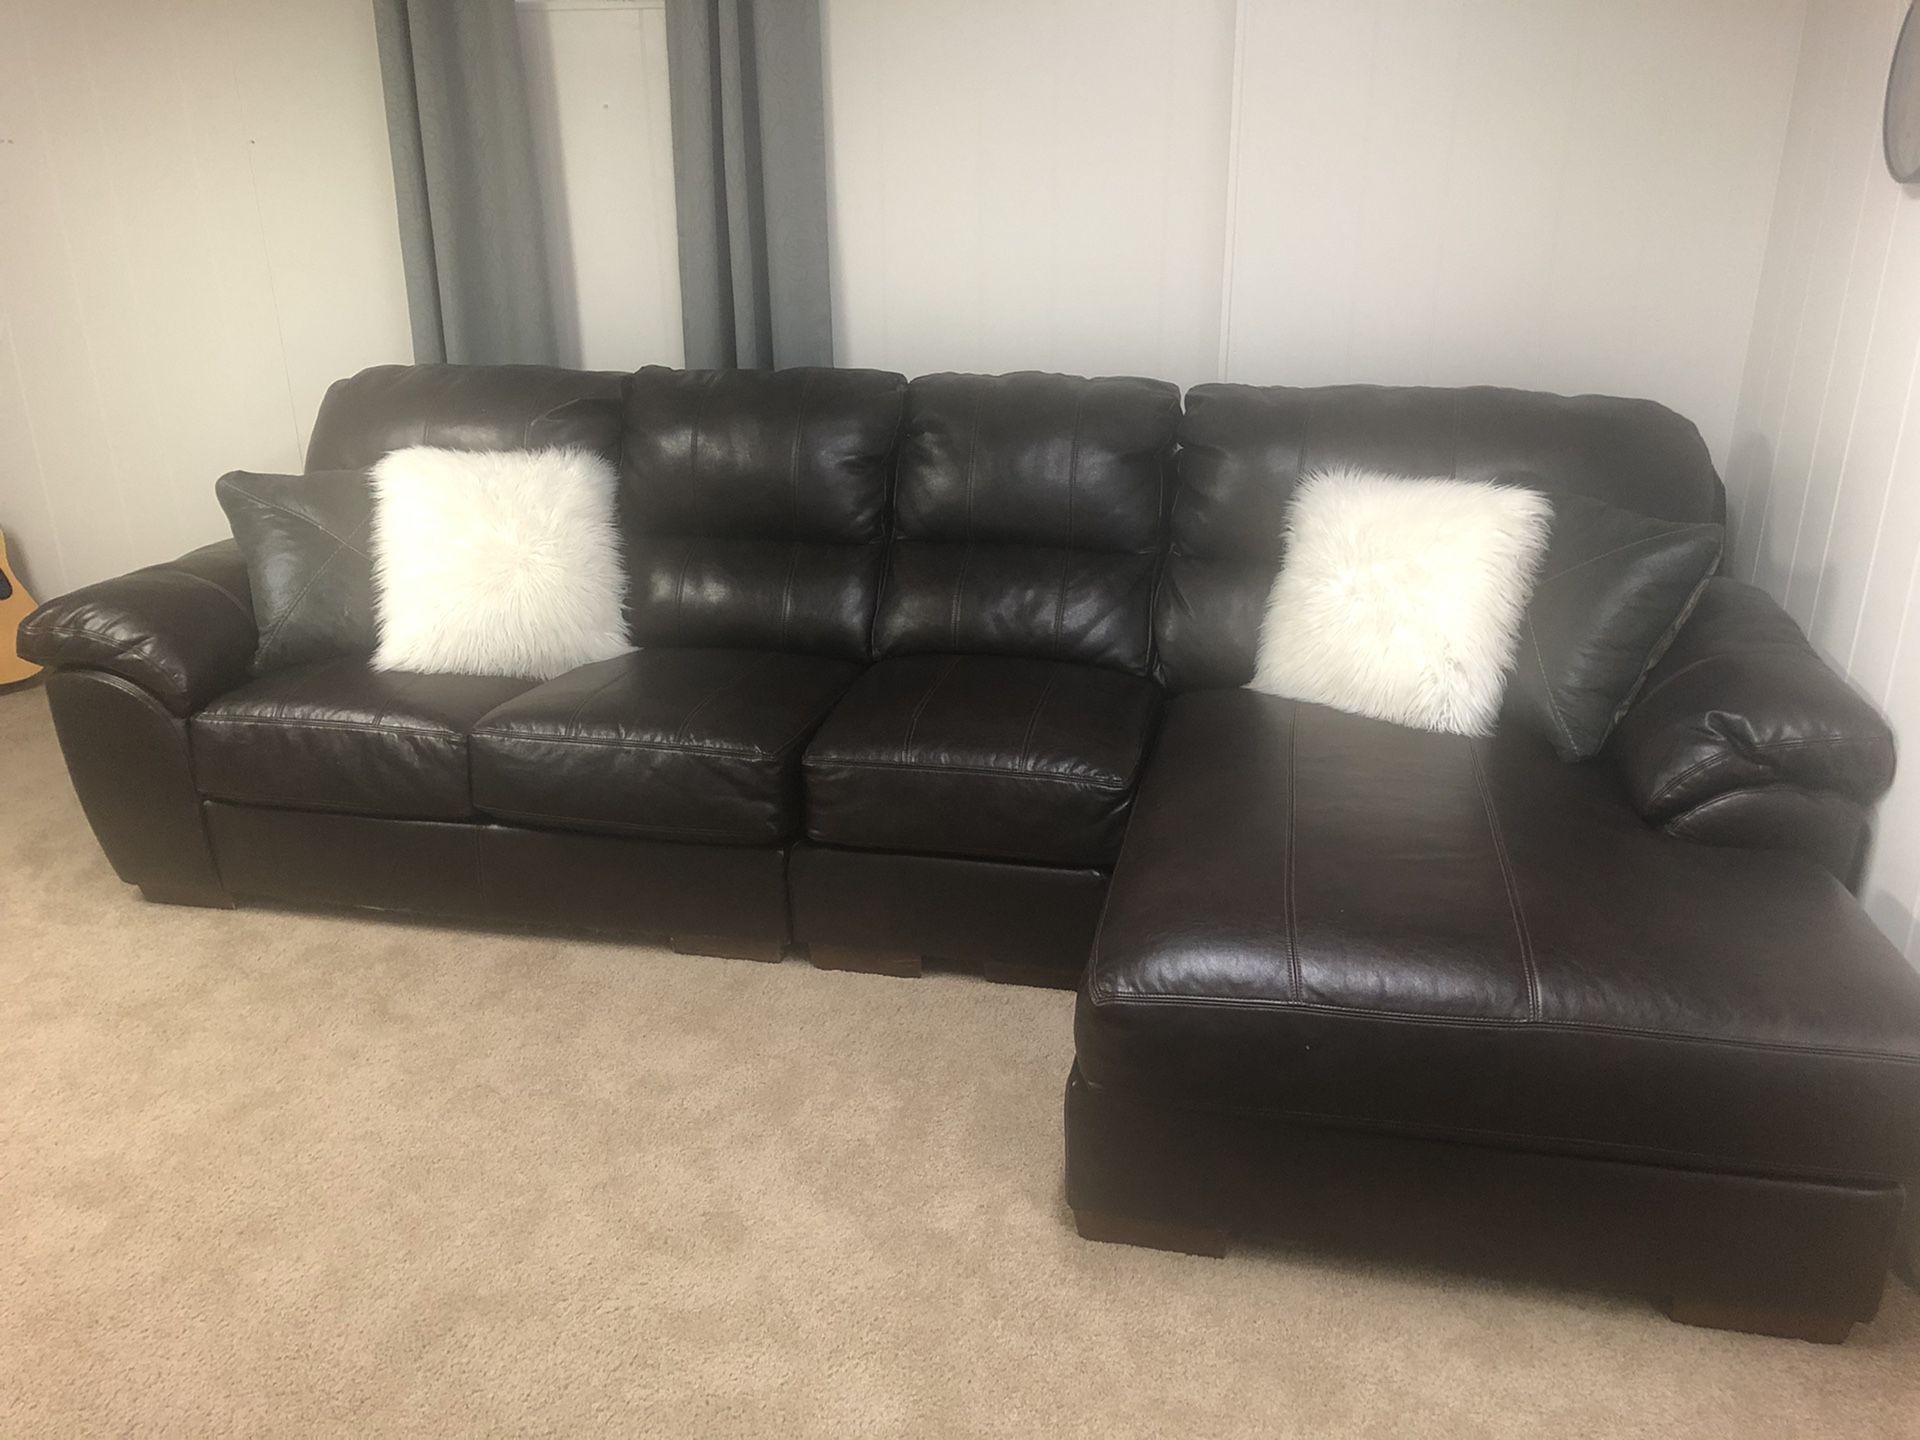 American Furniture Leather Lawson 3 piece sectional